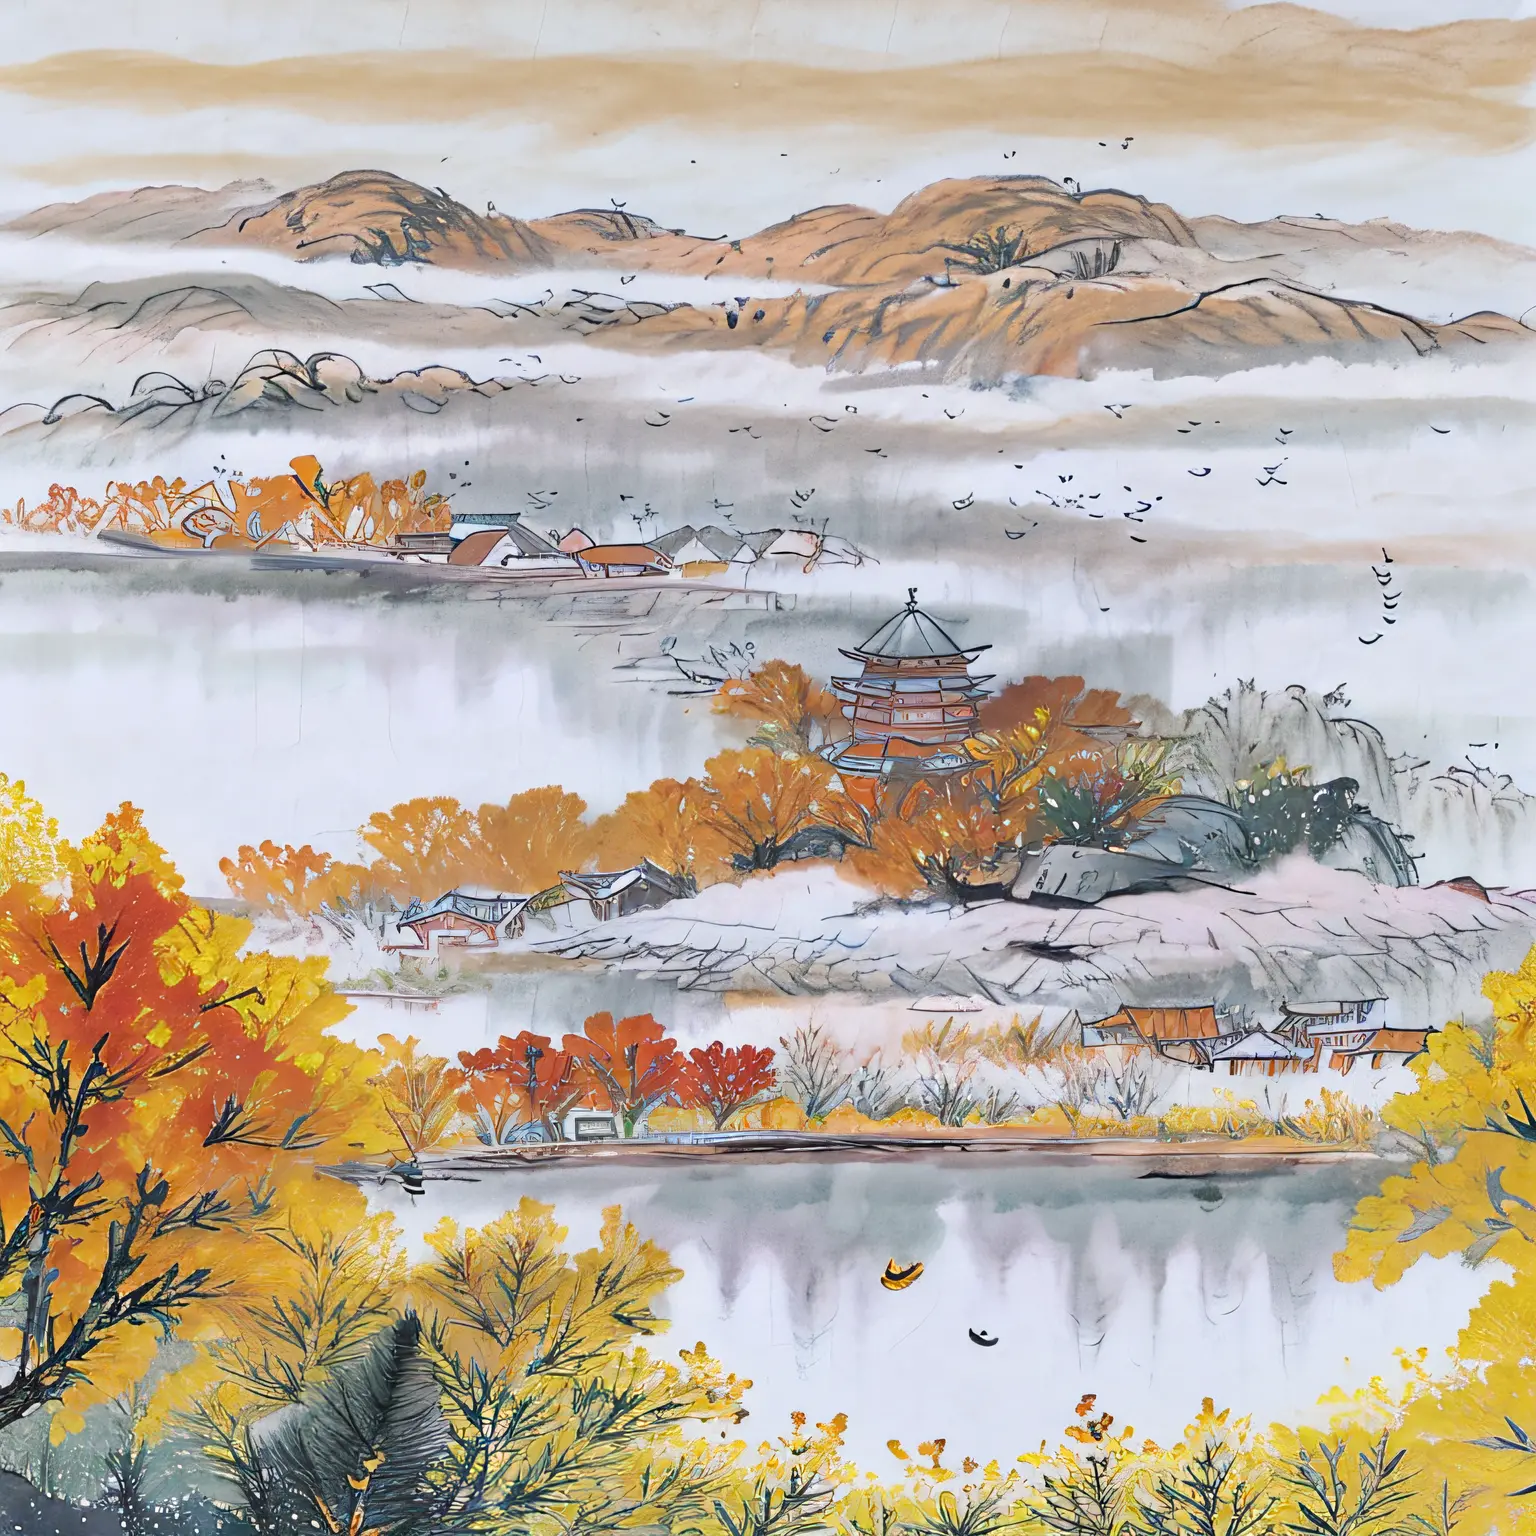 ((materpiece)), ((best quality)), ((high-res)), ((Ink wash)), ((artist)), ((extremely detail)), a Chinese tower, autumn, golden ...